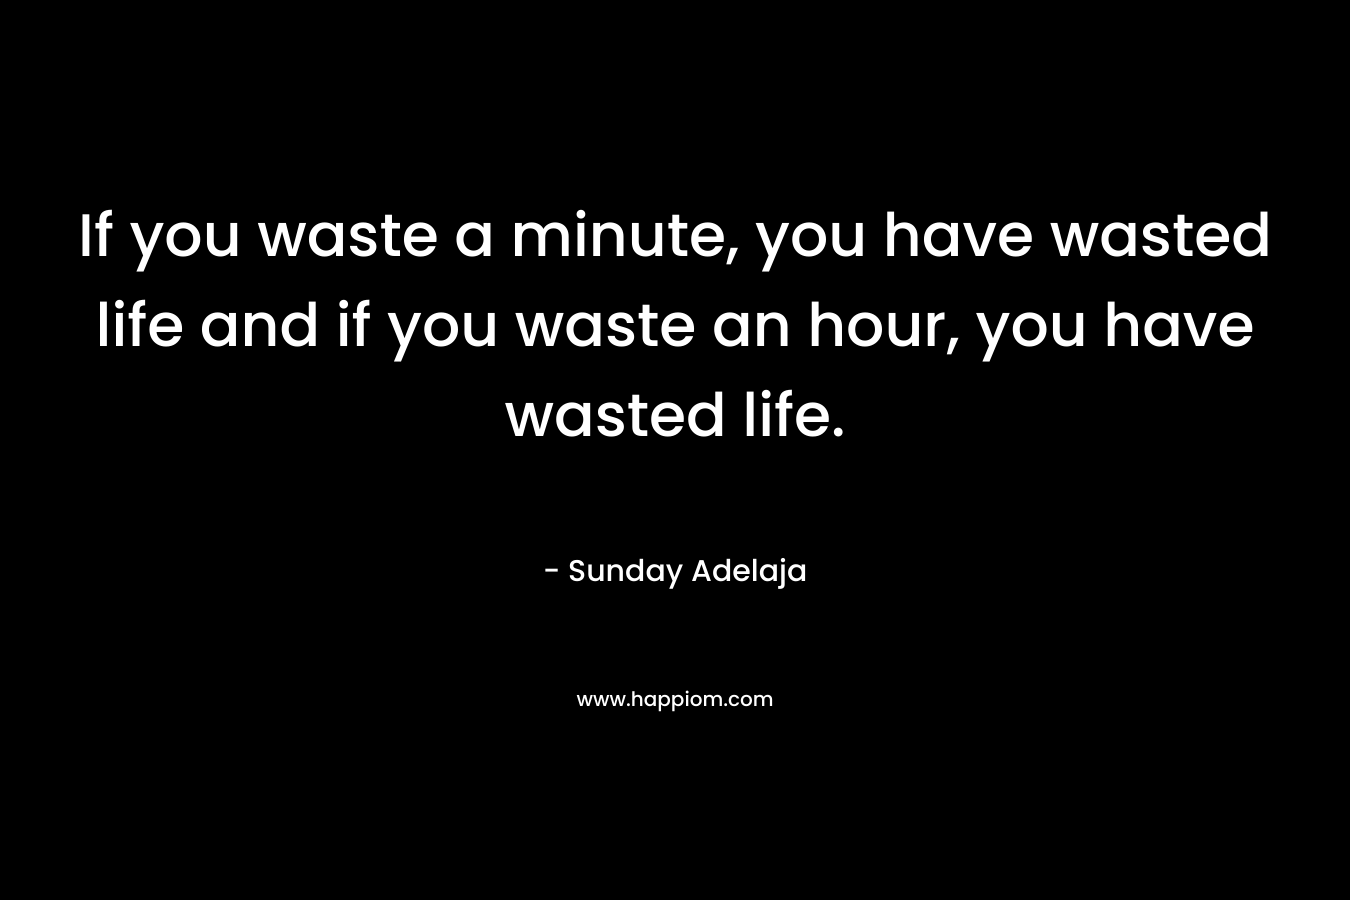 If you waste a minute, you have wasted life and if you waste an hour, you have wasted life.